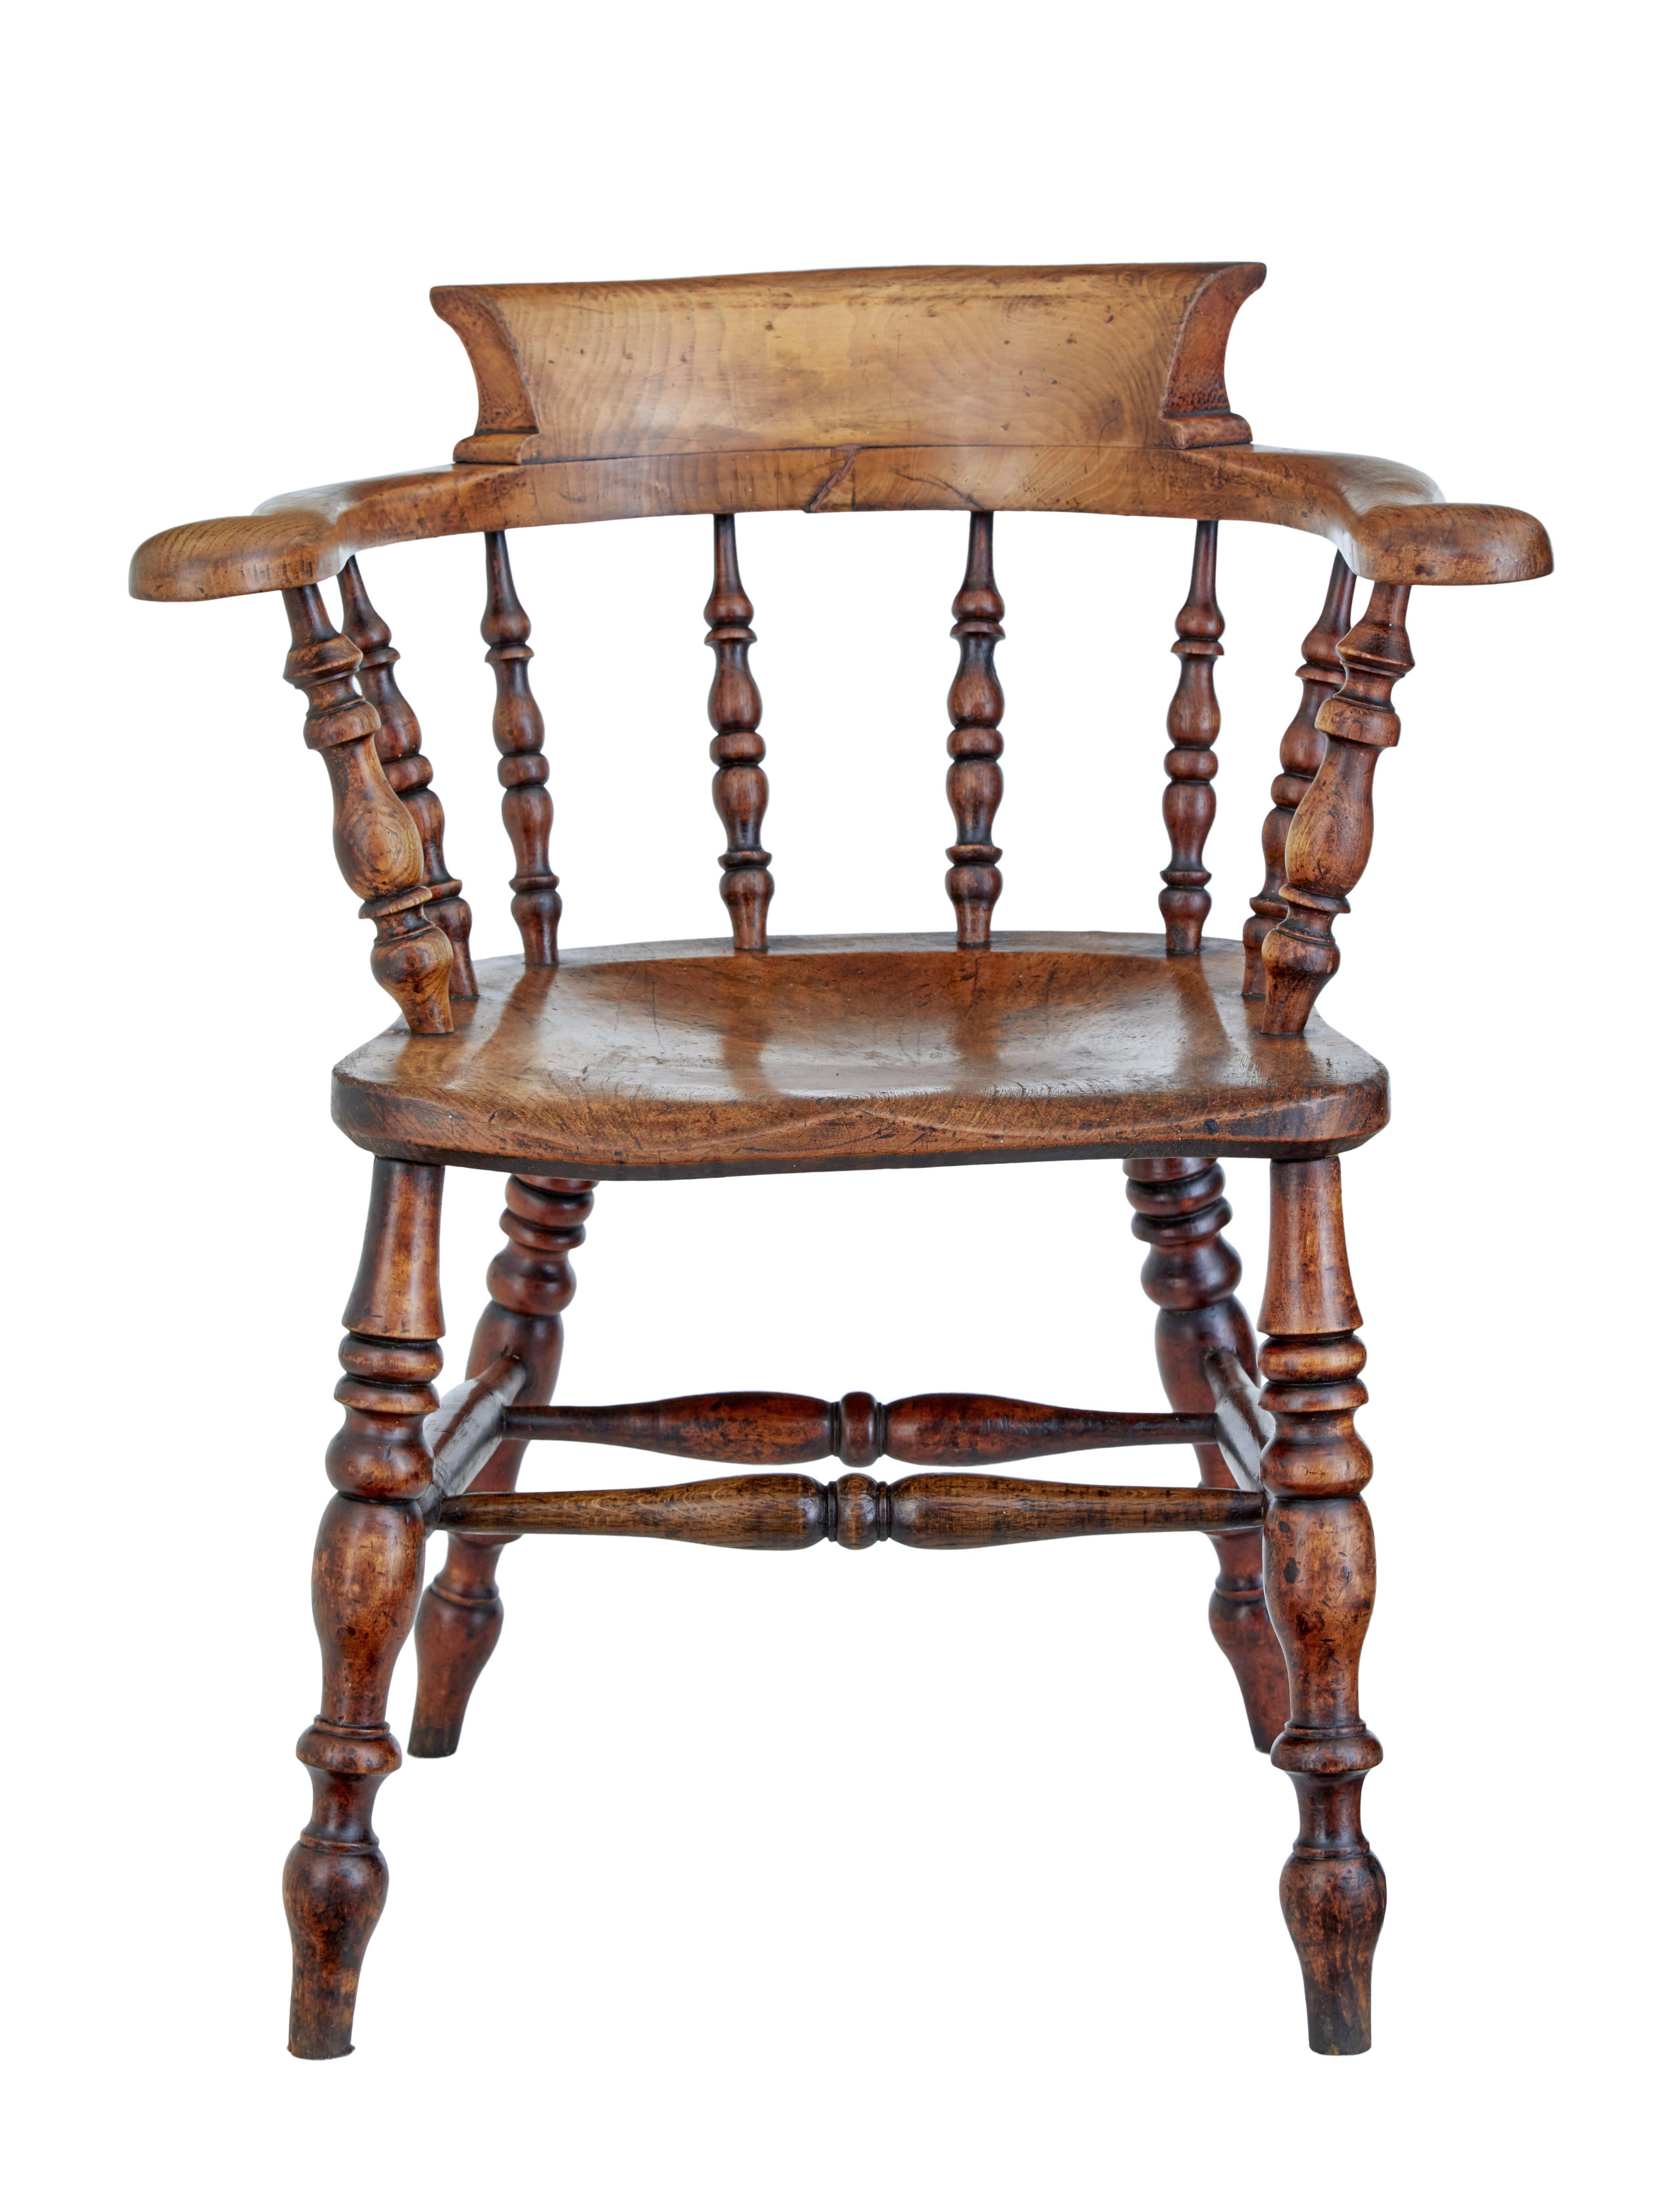 Mid 19th century elm captains armchair circa 1860.

Good quality character armchair made from solid elm. Shaped back and arm linked with turned spindles to the seat. Turned legs united by stretcher.

Obvious surface marks and natural movement to